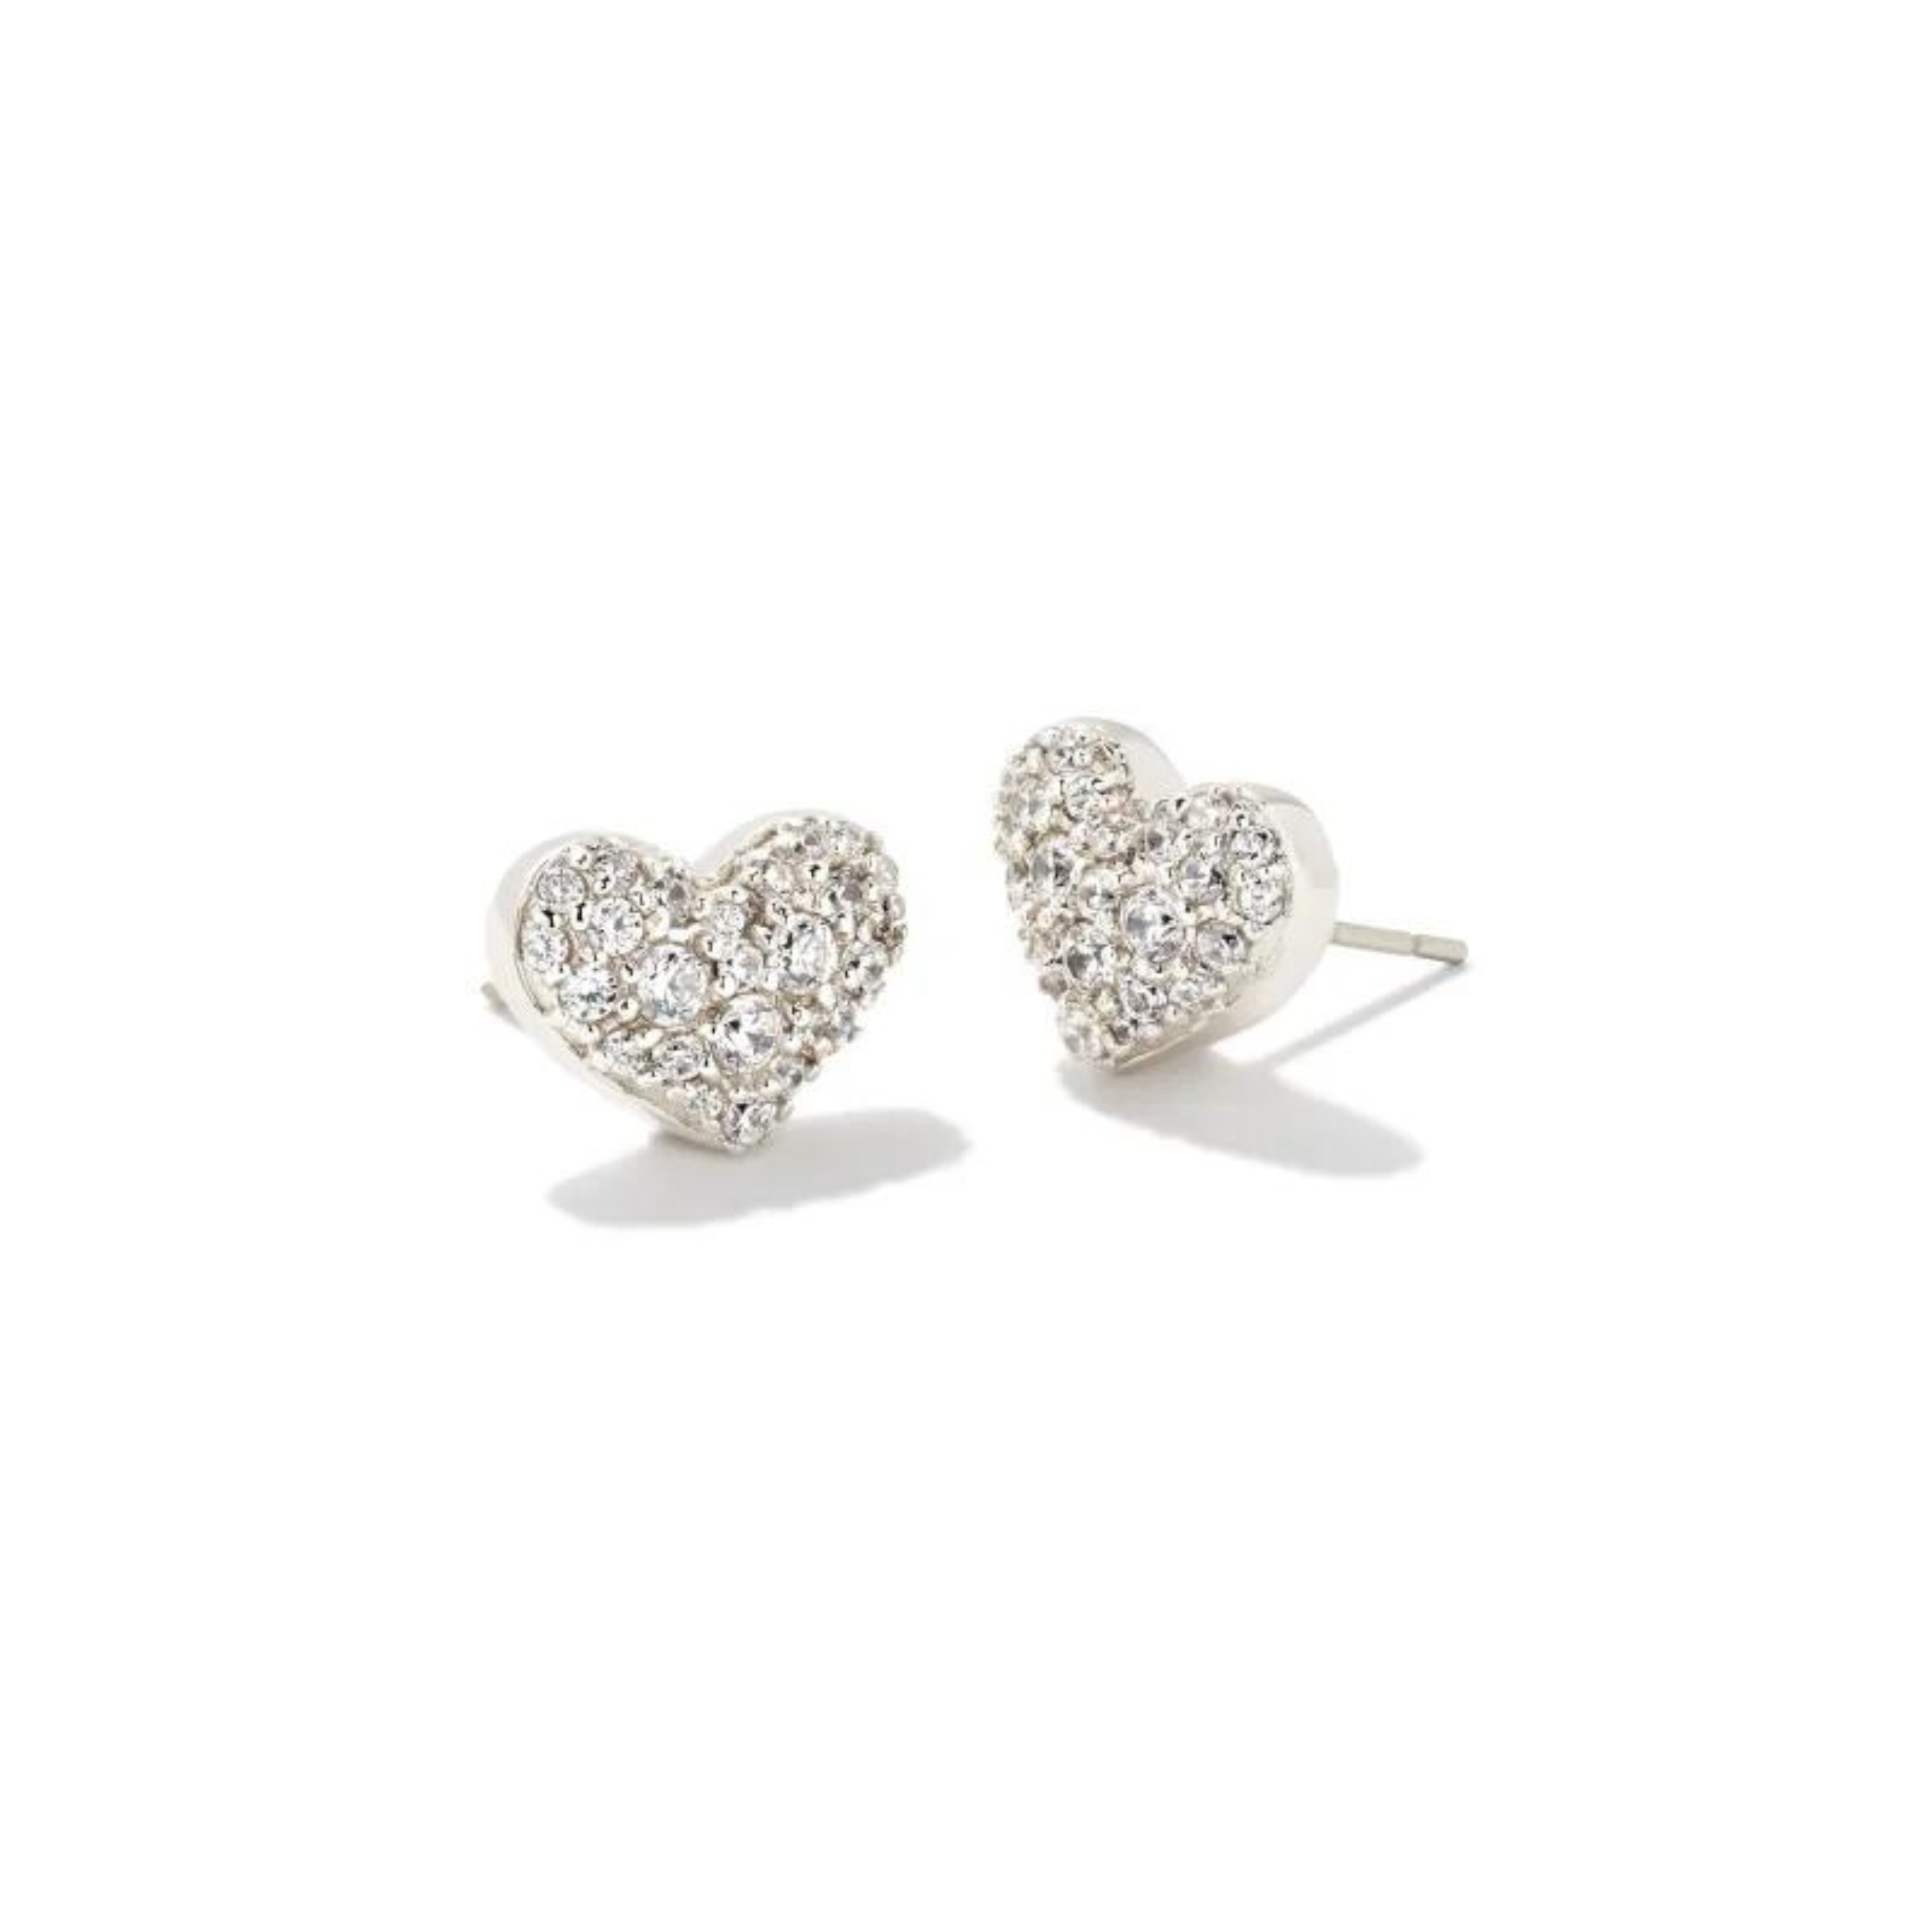 Silver stud heart shaped earrings with white crystals pictured on a white background.